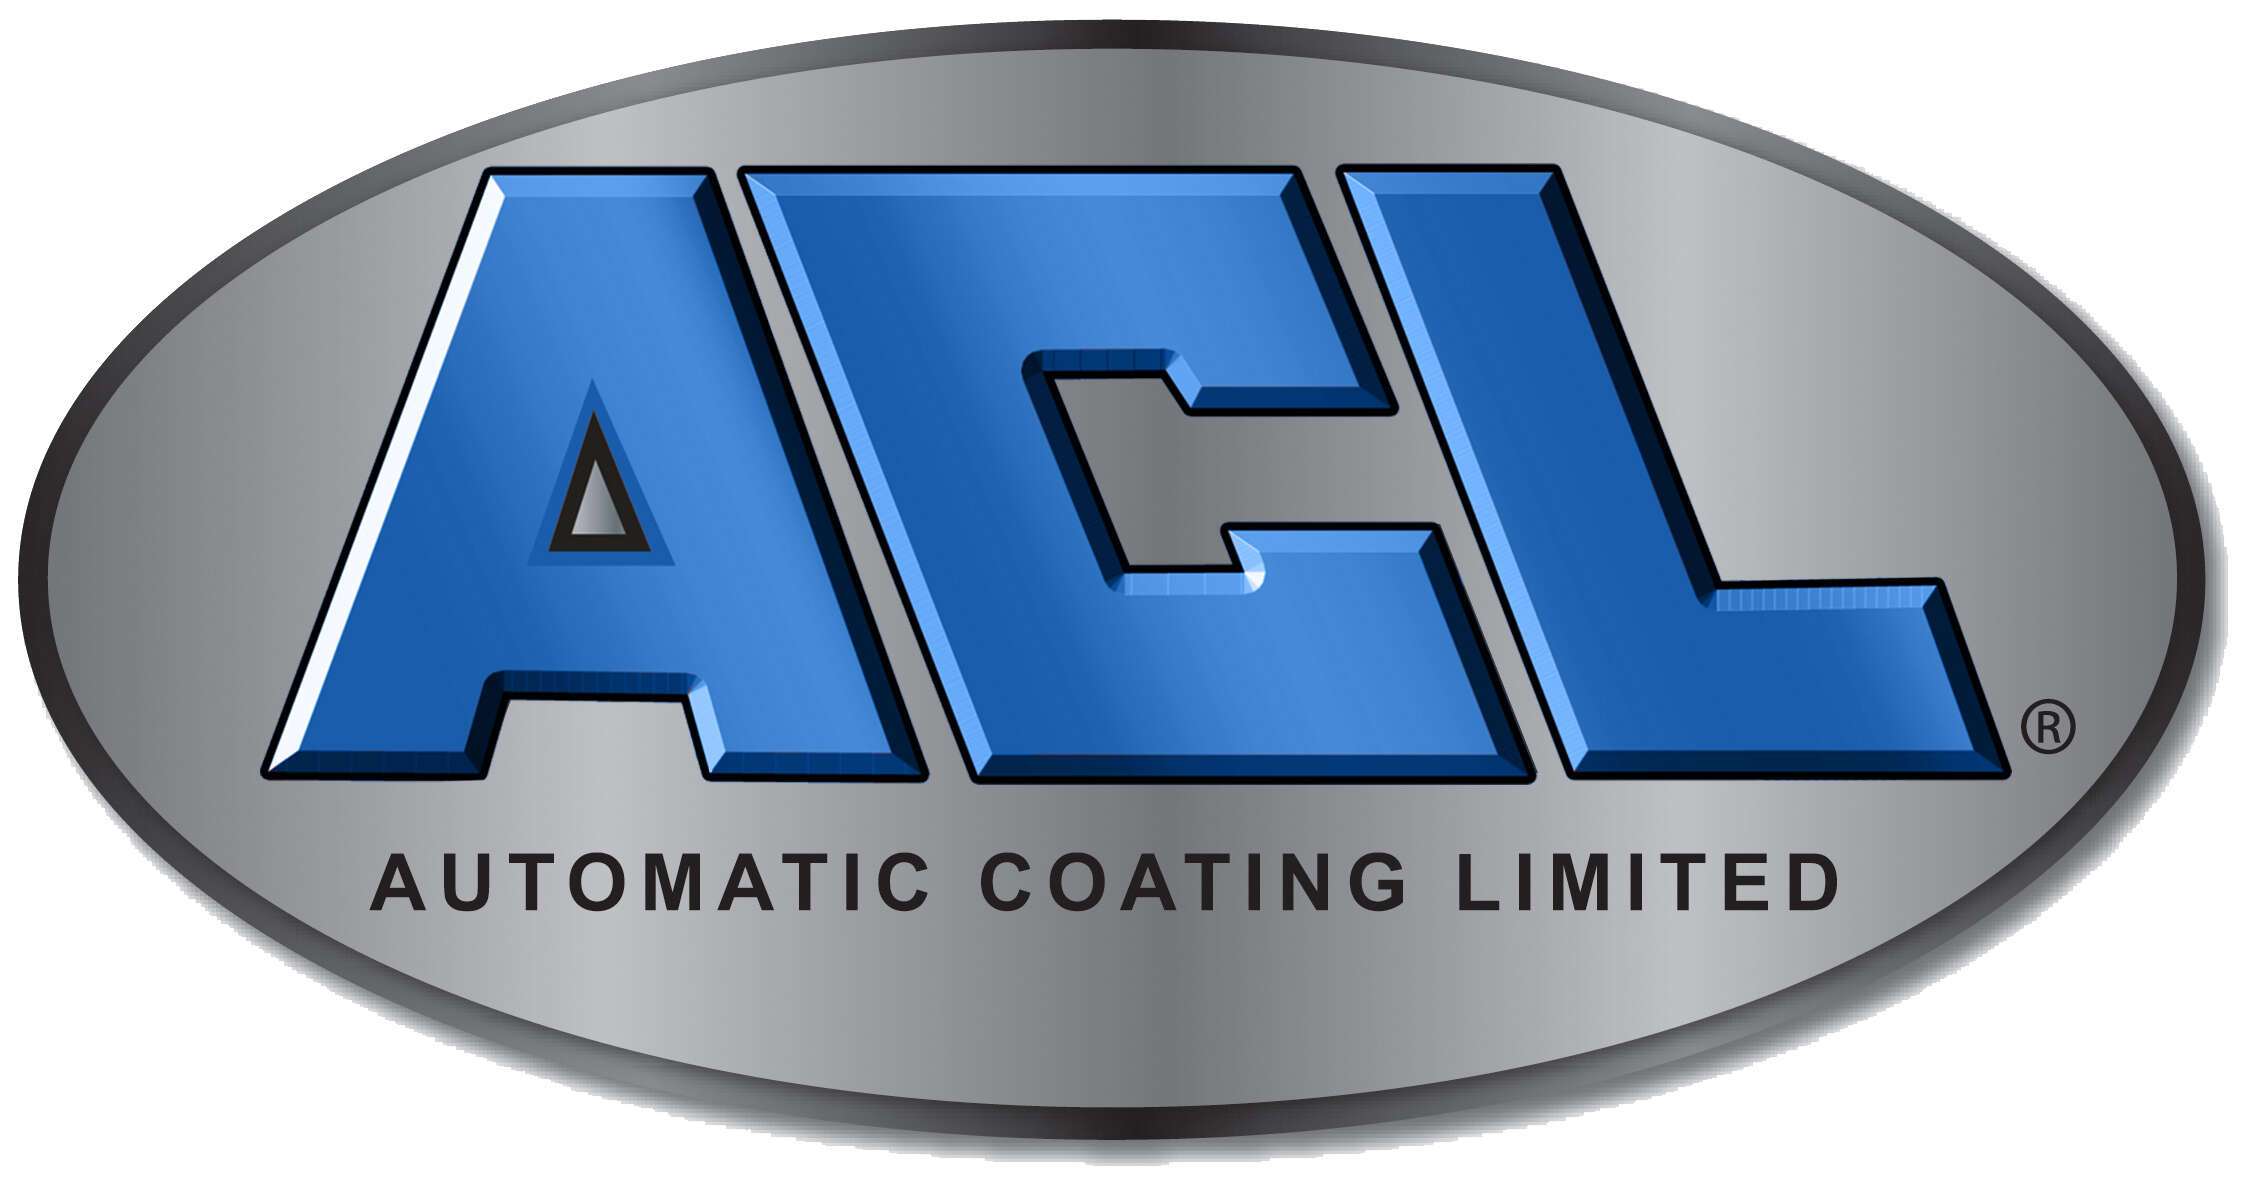 Automatic Coating Limited